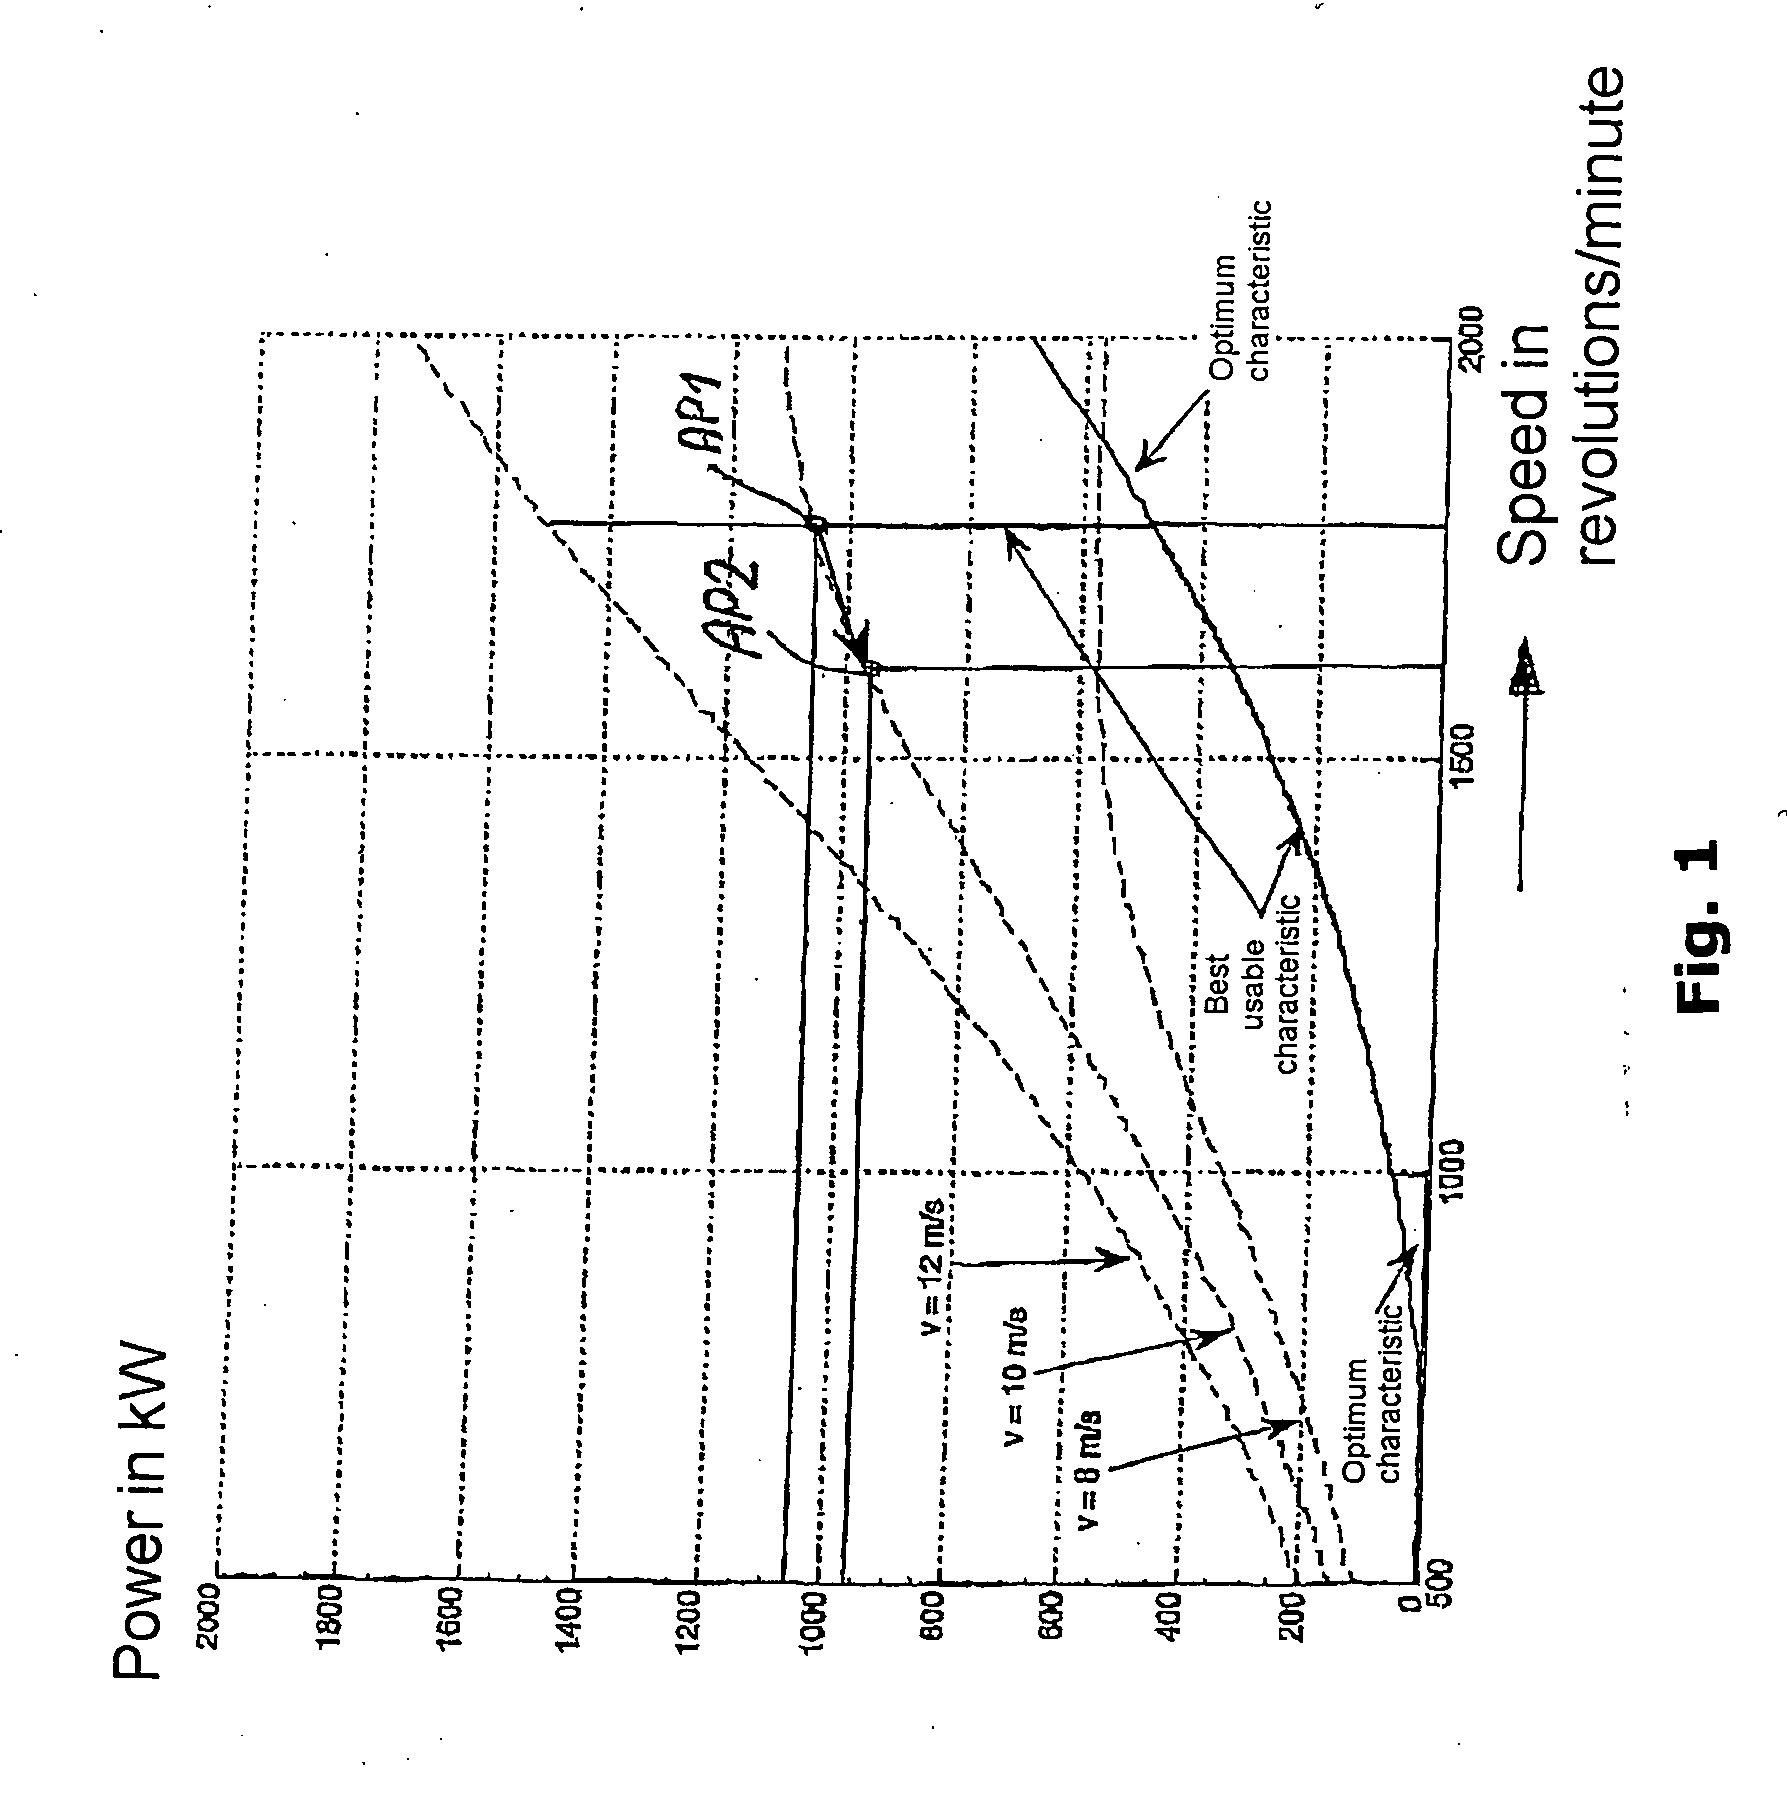 Method for operating or controlling a wind turbine and method for providing primary control power by means of wind turbines